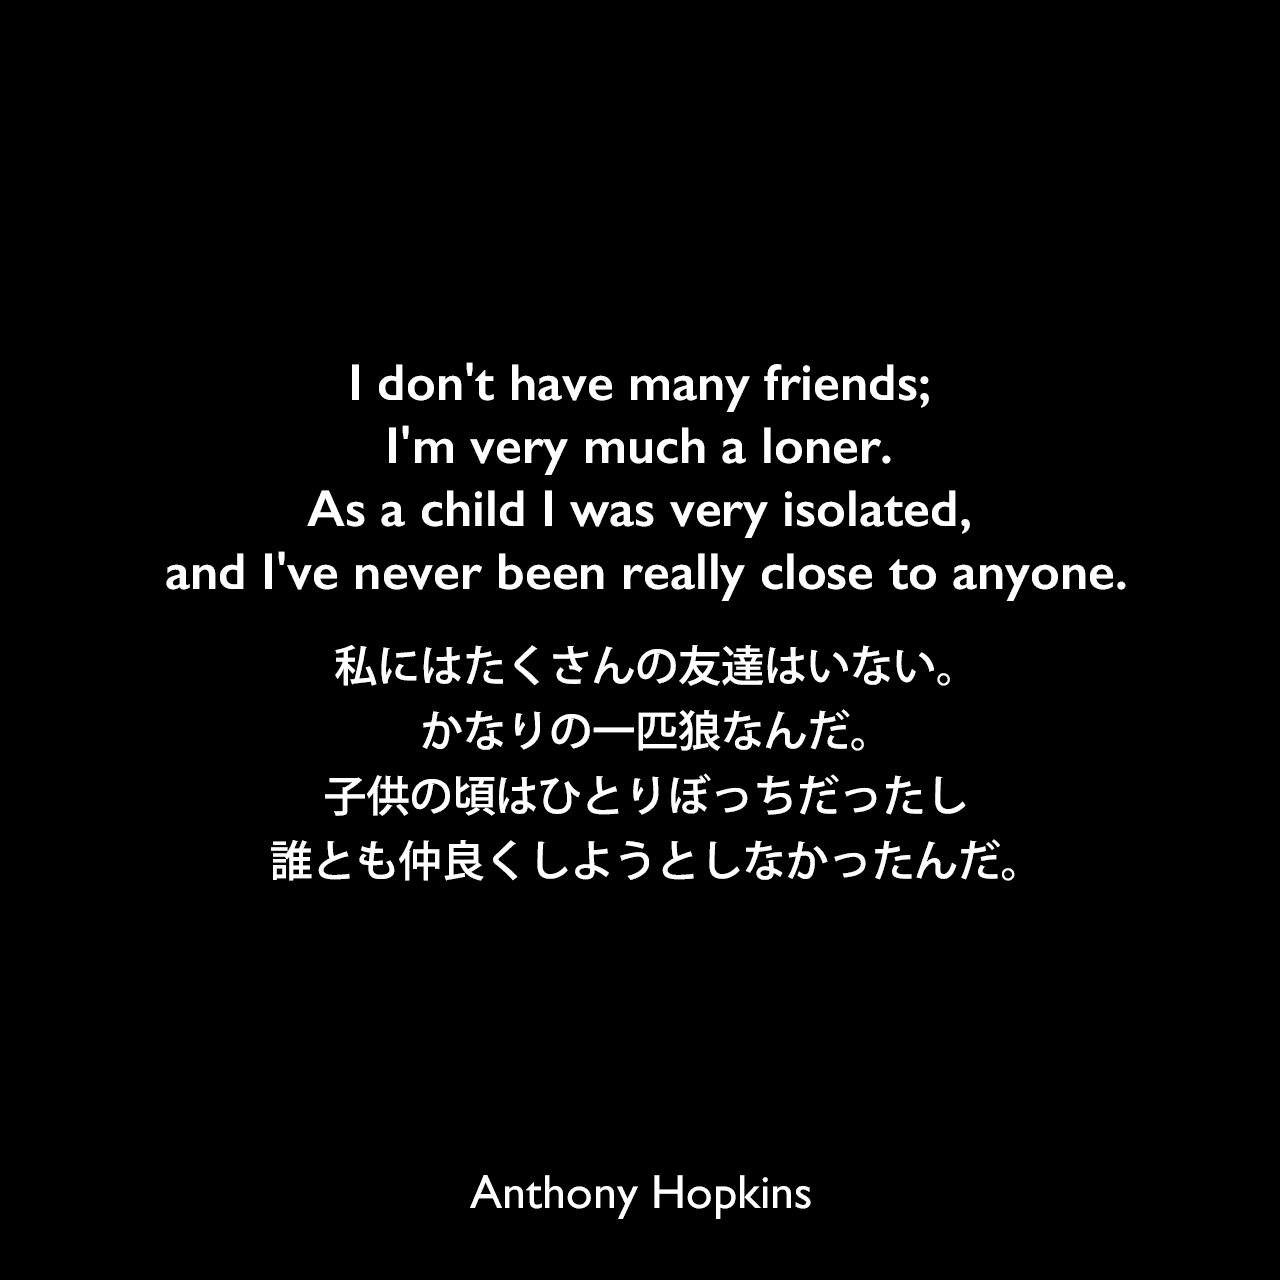 I don't have many friends; I'm very much a loner. As a child I was very isolated, and I've never been really close to anyone.私にはたくさんの友達はいない。かなりの一匹狼なんだ。子供の頃はひとりぼっちだったし、誰とも仲良くしようとしなかったんだ。Anthony Hopkins